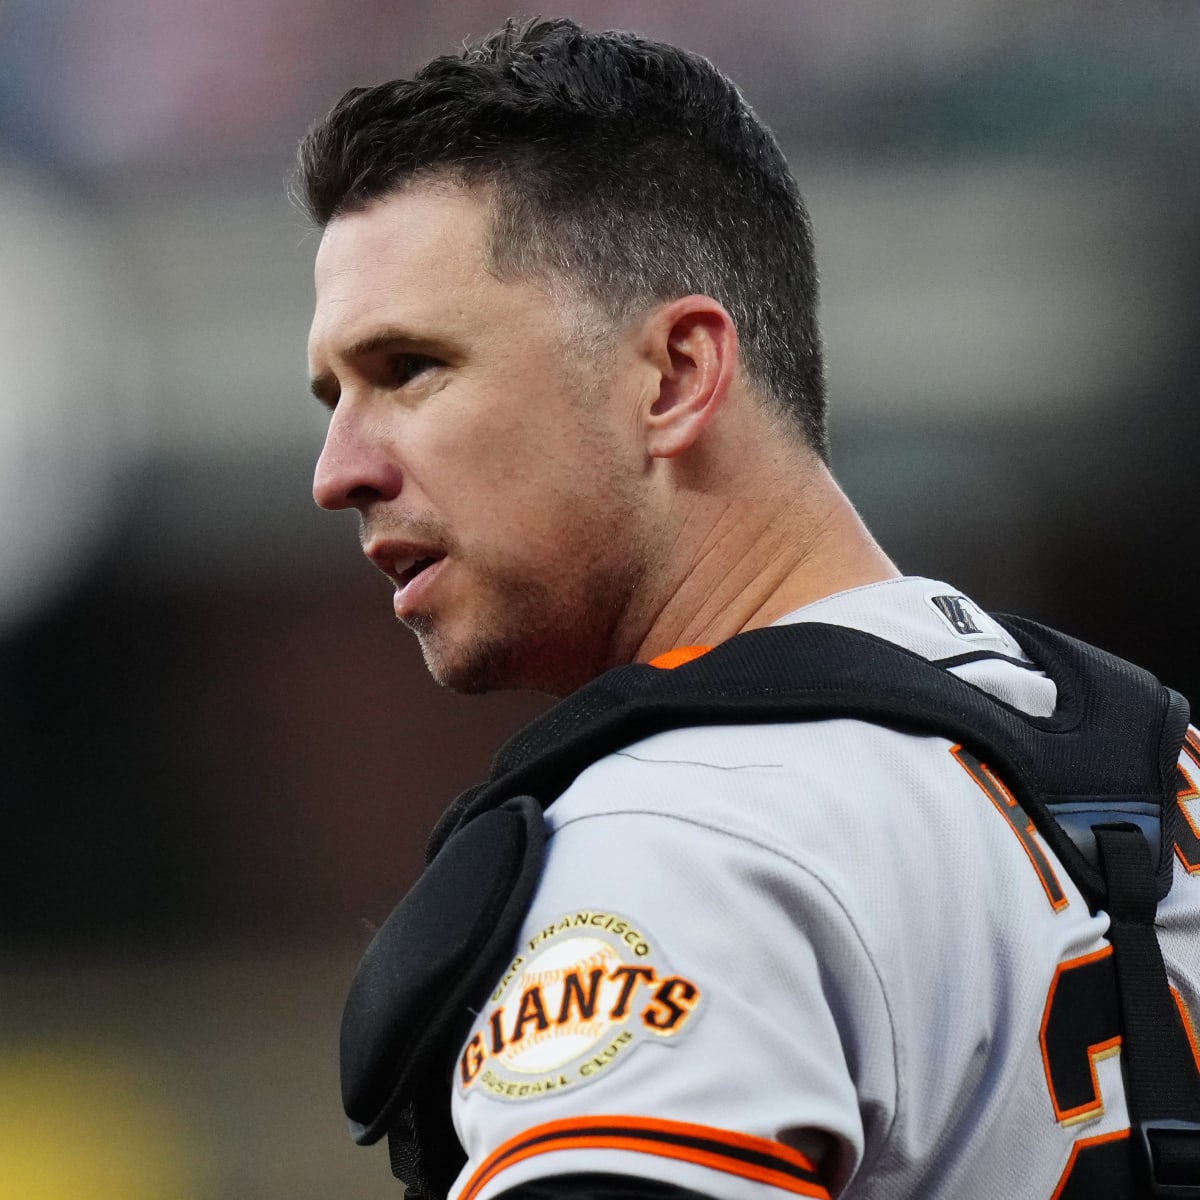 Buster Posey's son hijacks interview with charming gibberish - Sports  Illustrated